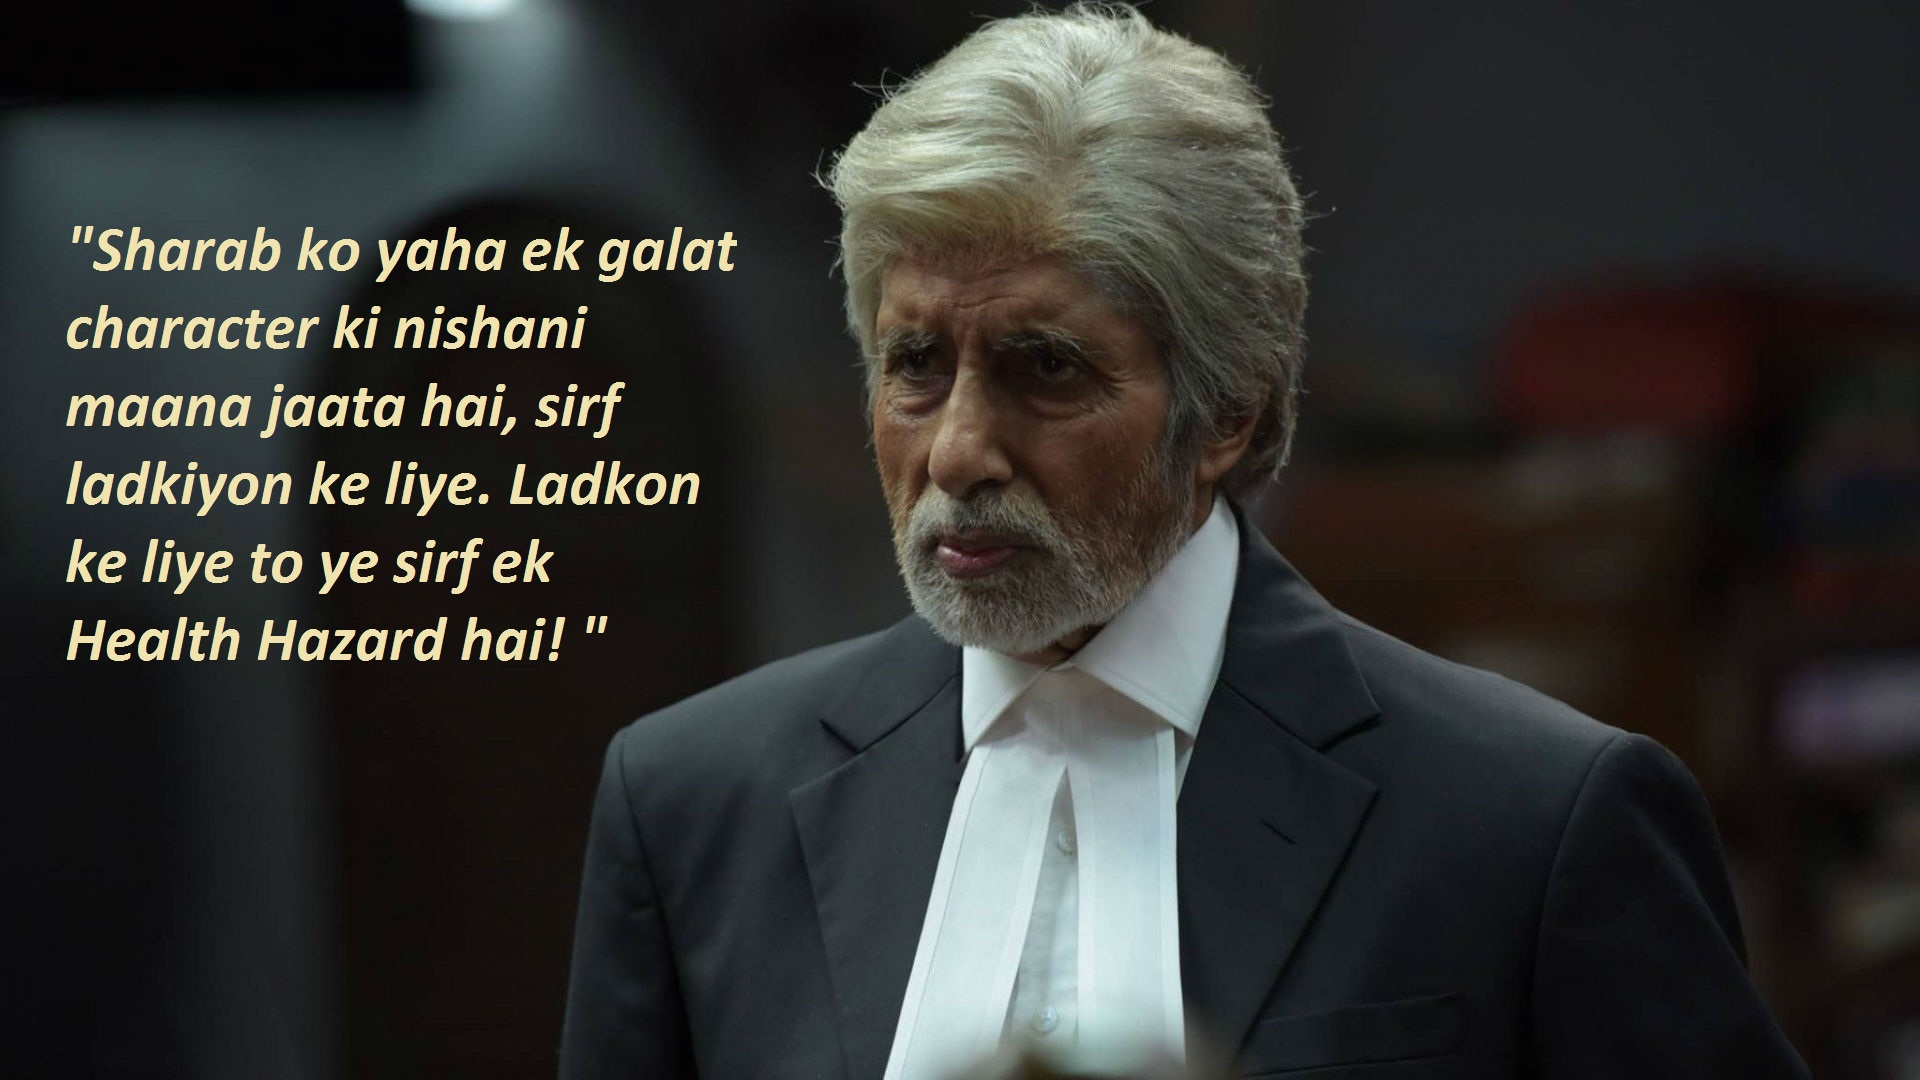 4. Best Dialogues From PINK Movie